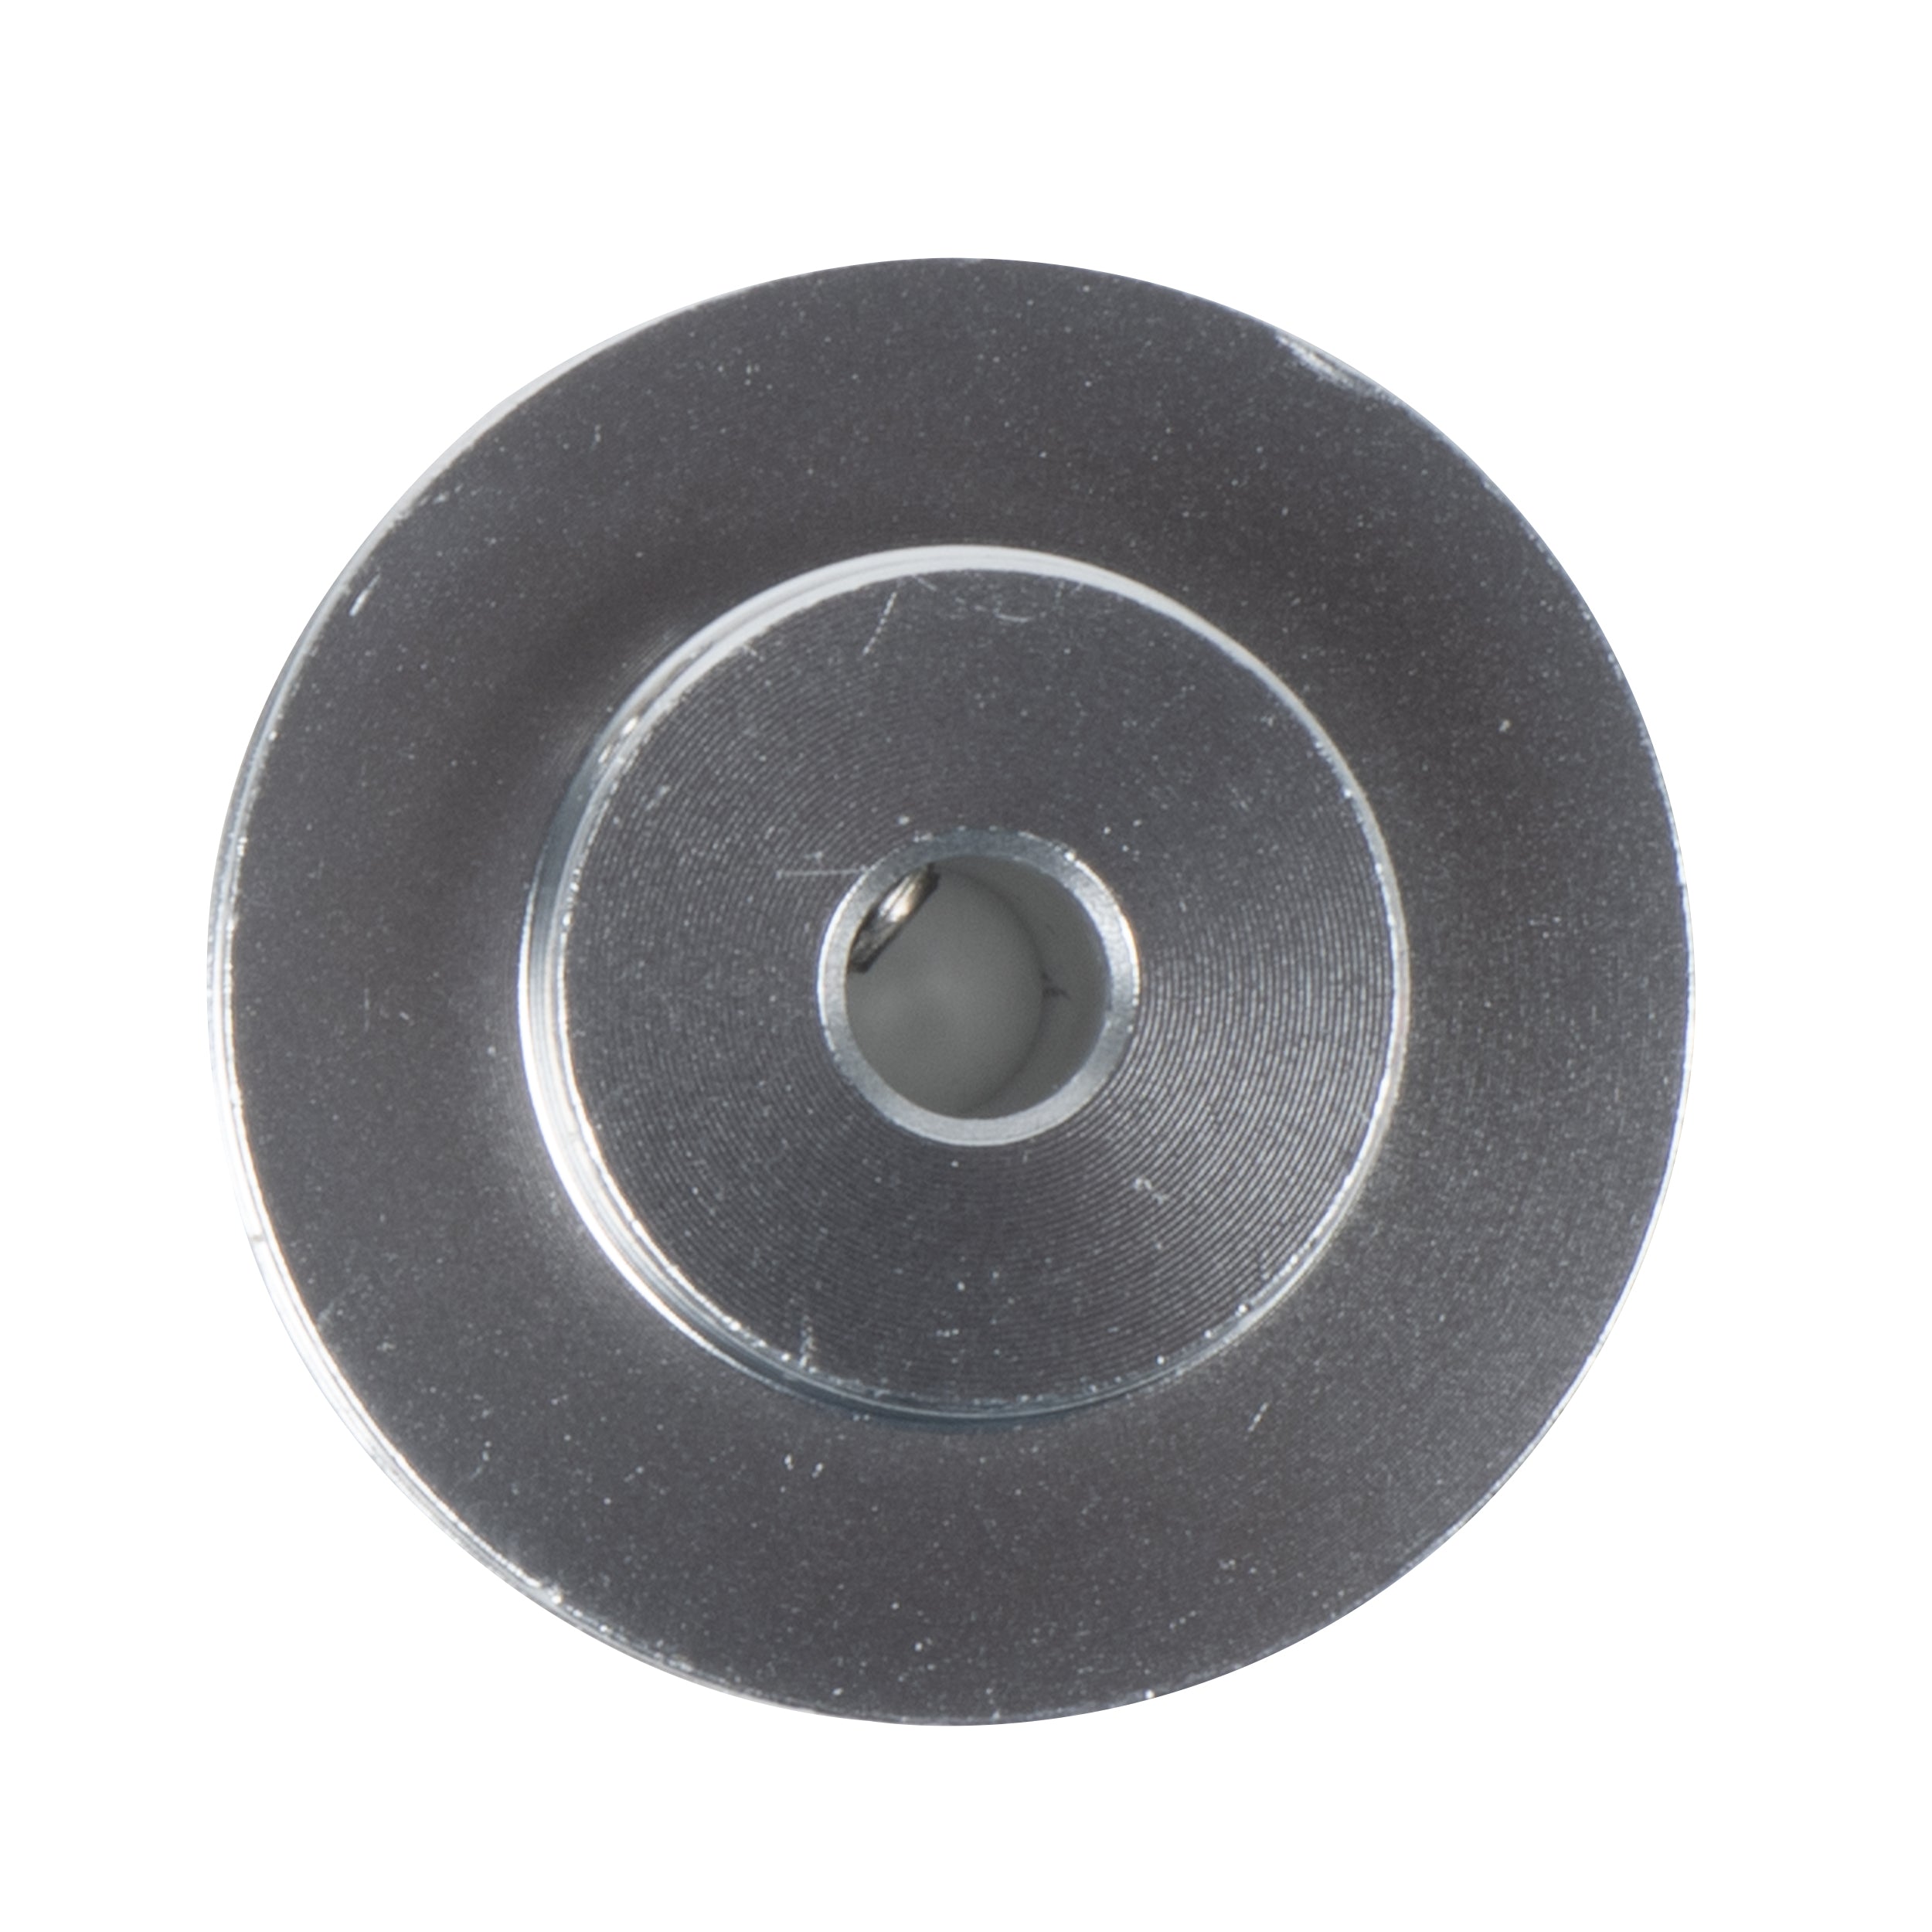 RBS PRO G2 Small Pulley for Wrapping Motor